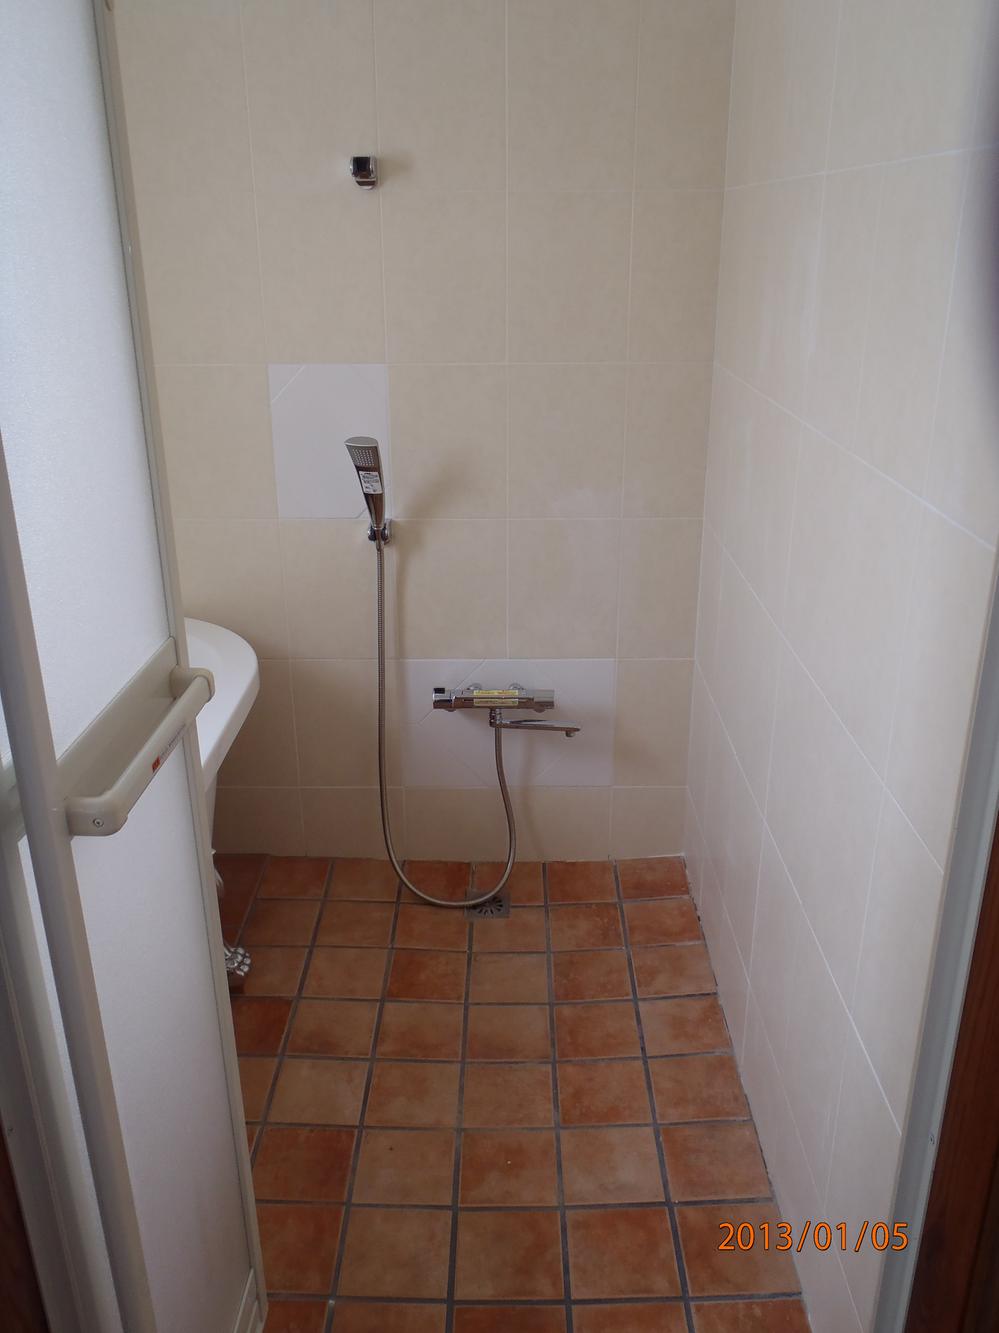 Other. Bathroom same specifications